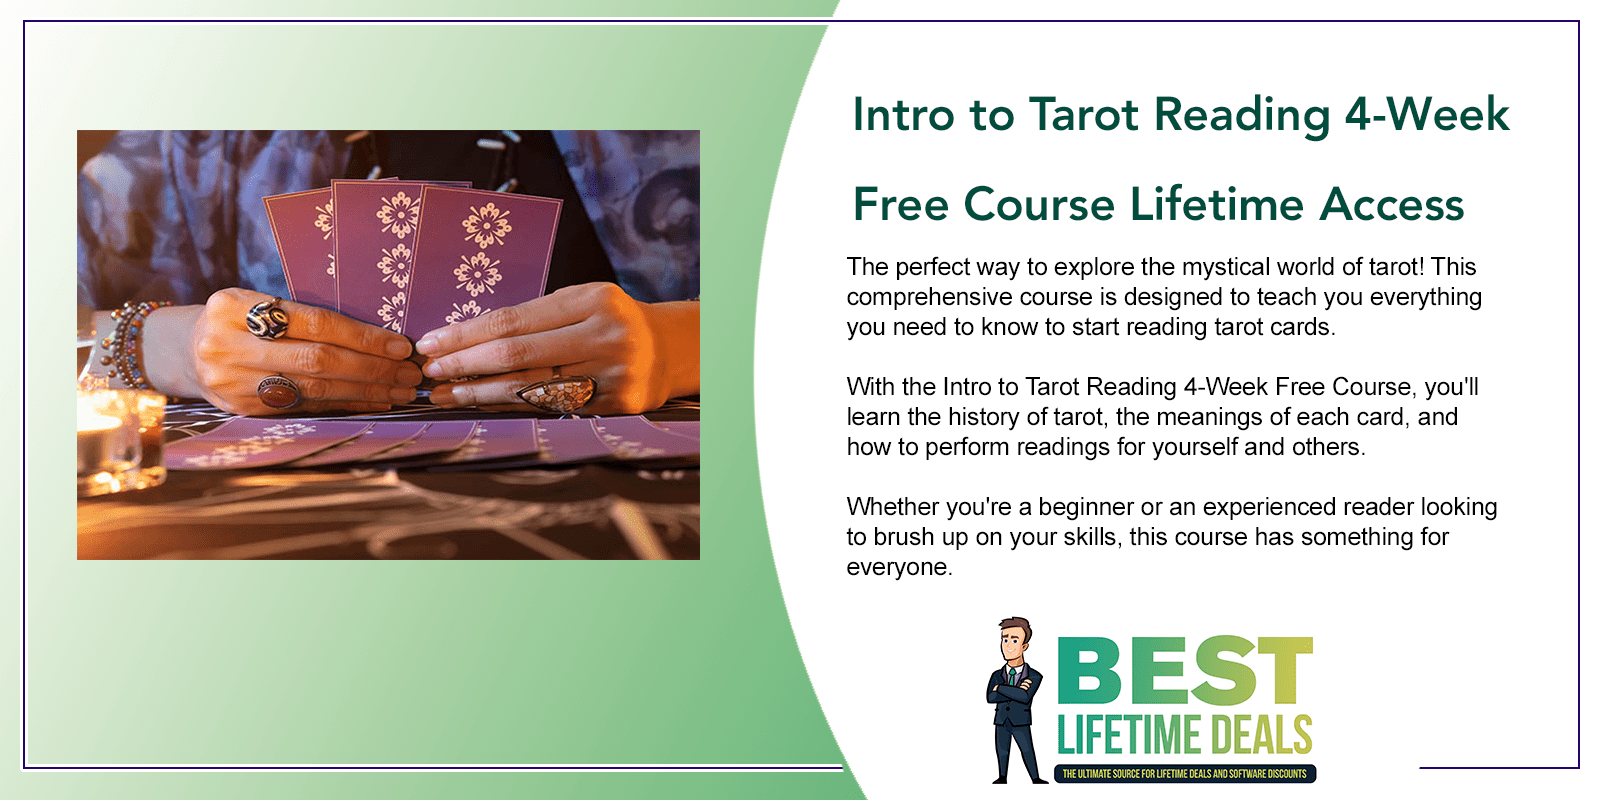 Intro to Tarot Reading Featured Image